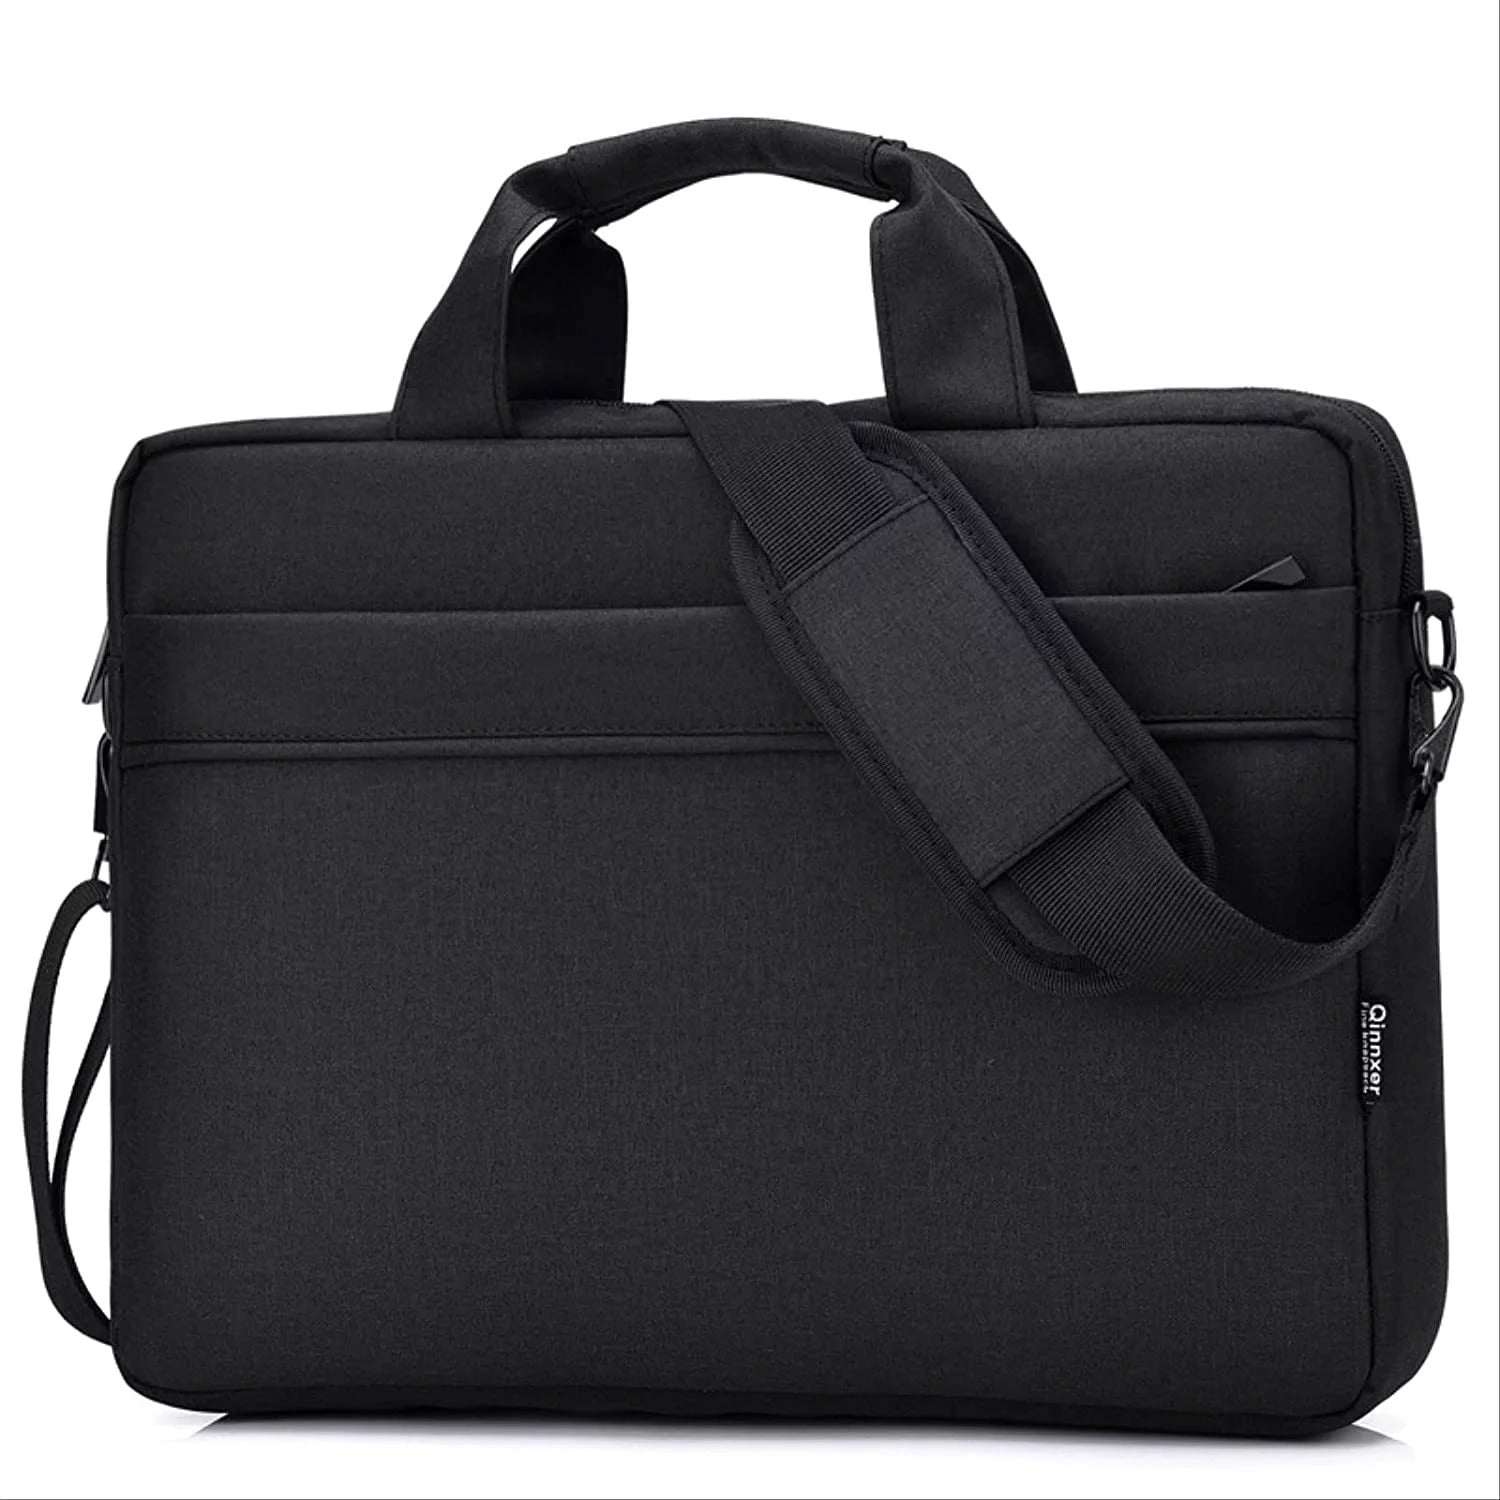 Cases & Bags - Laptop Bag with Shoulder Strap for sale in Cape Town (ID ...